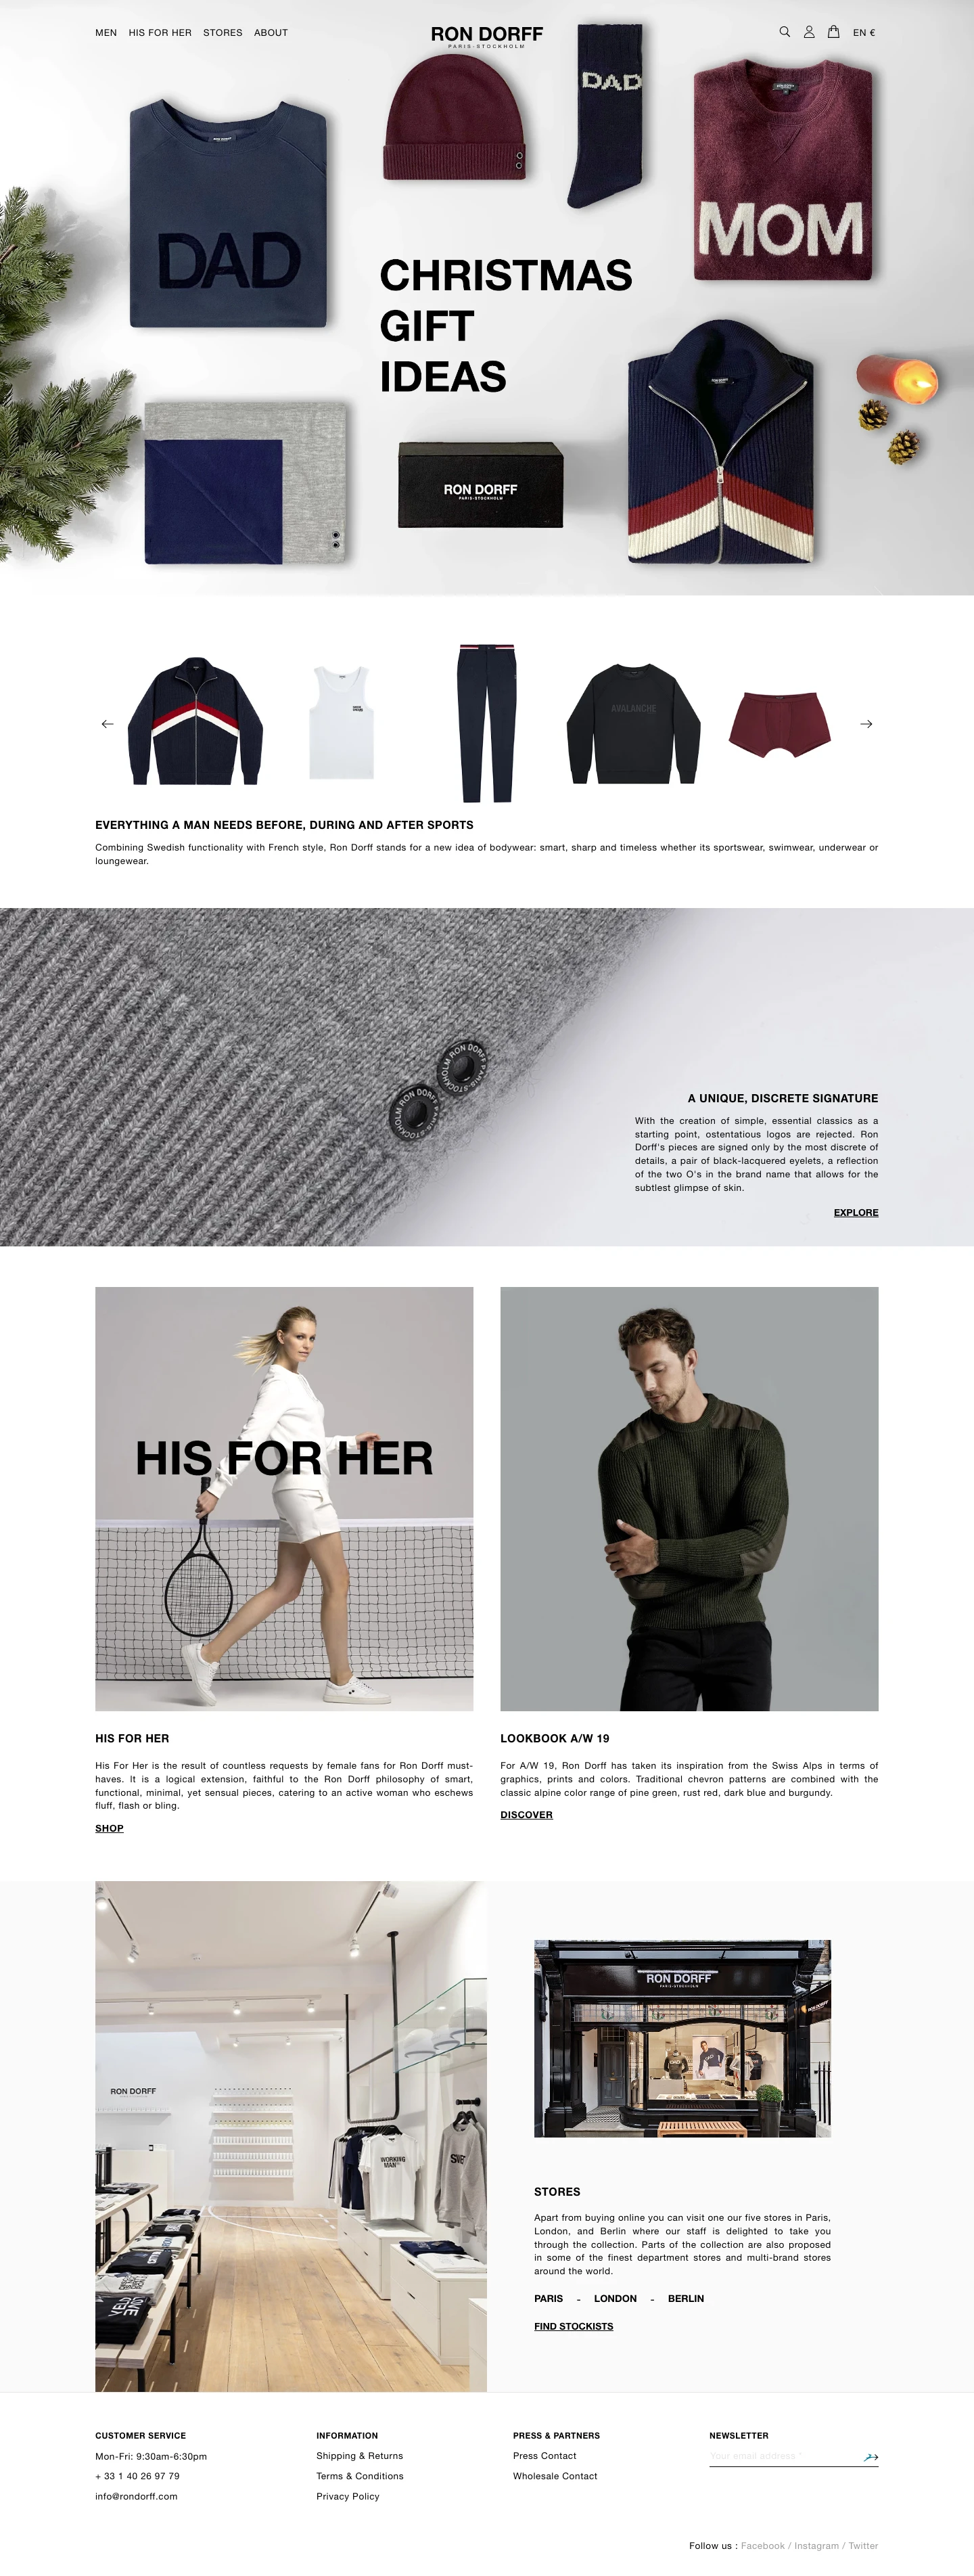 Ron Dorff Landing Page Example: Combining Swedish functionality with French style, Ron Dorff stands for a new idea of bodywear: smart, sharp and timeless whether its sportswear, swimwear, underwear or loungewear.